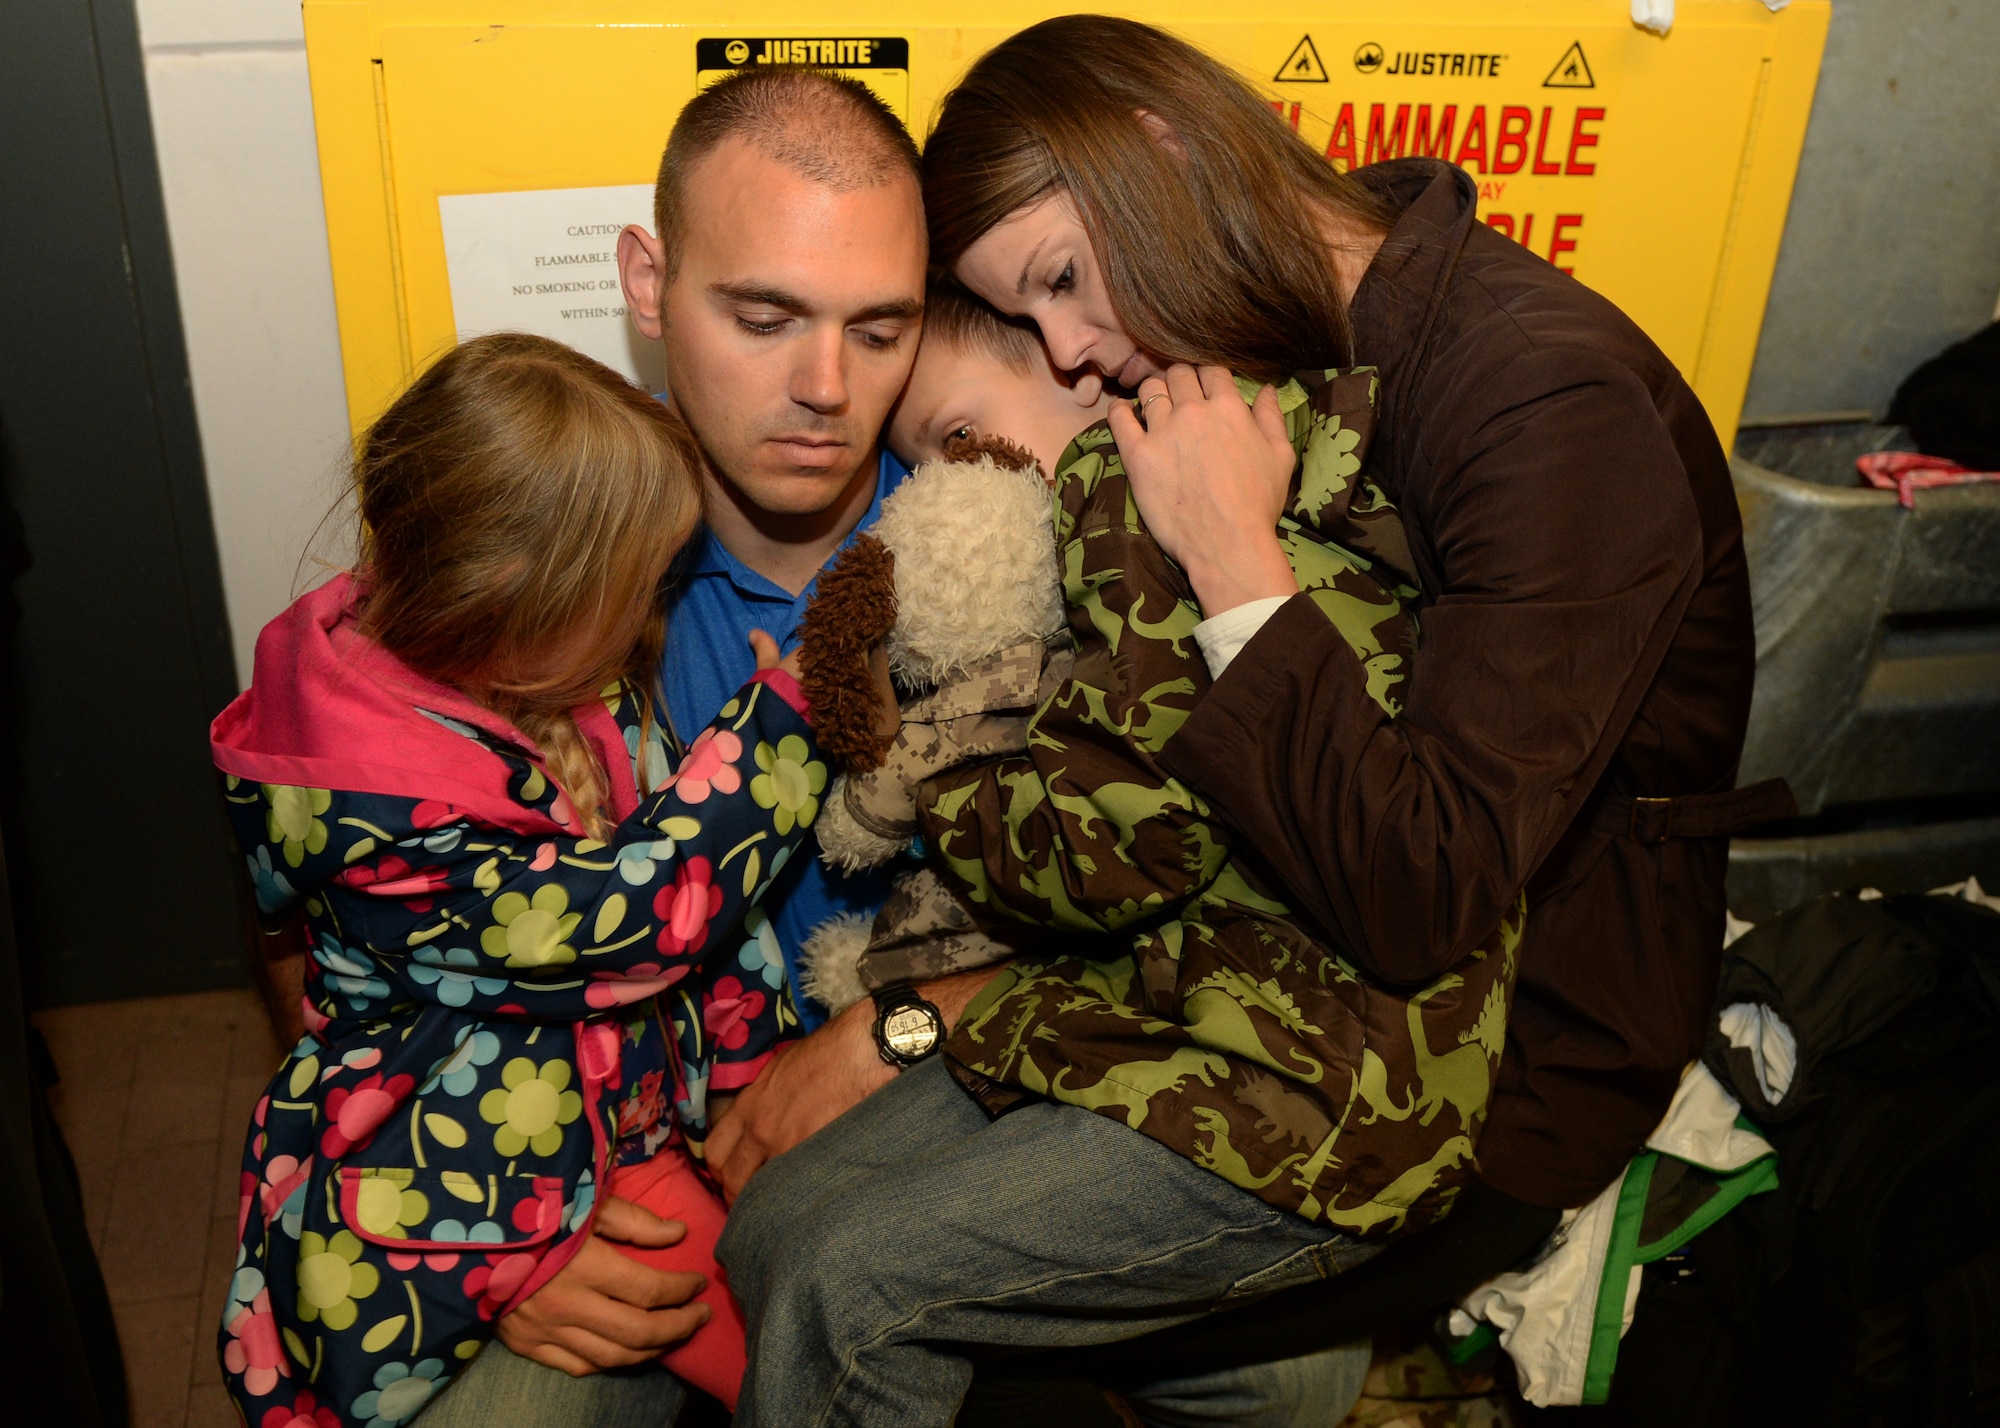 The Macri family embrace during a squadron deployment going away Oct. 7, 2014, at Spangdahlem Air Base, Germany. More than 300 people attended the event. (U.S. Air Force photo by Airman 1st Class Dylan Nuckolls/Released)